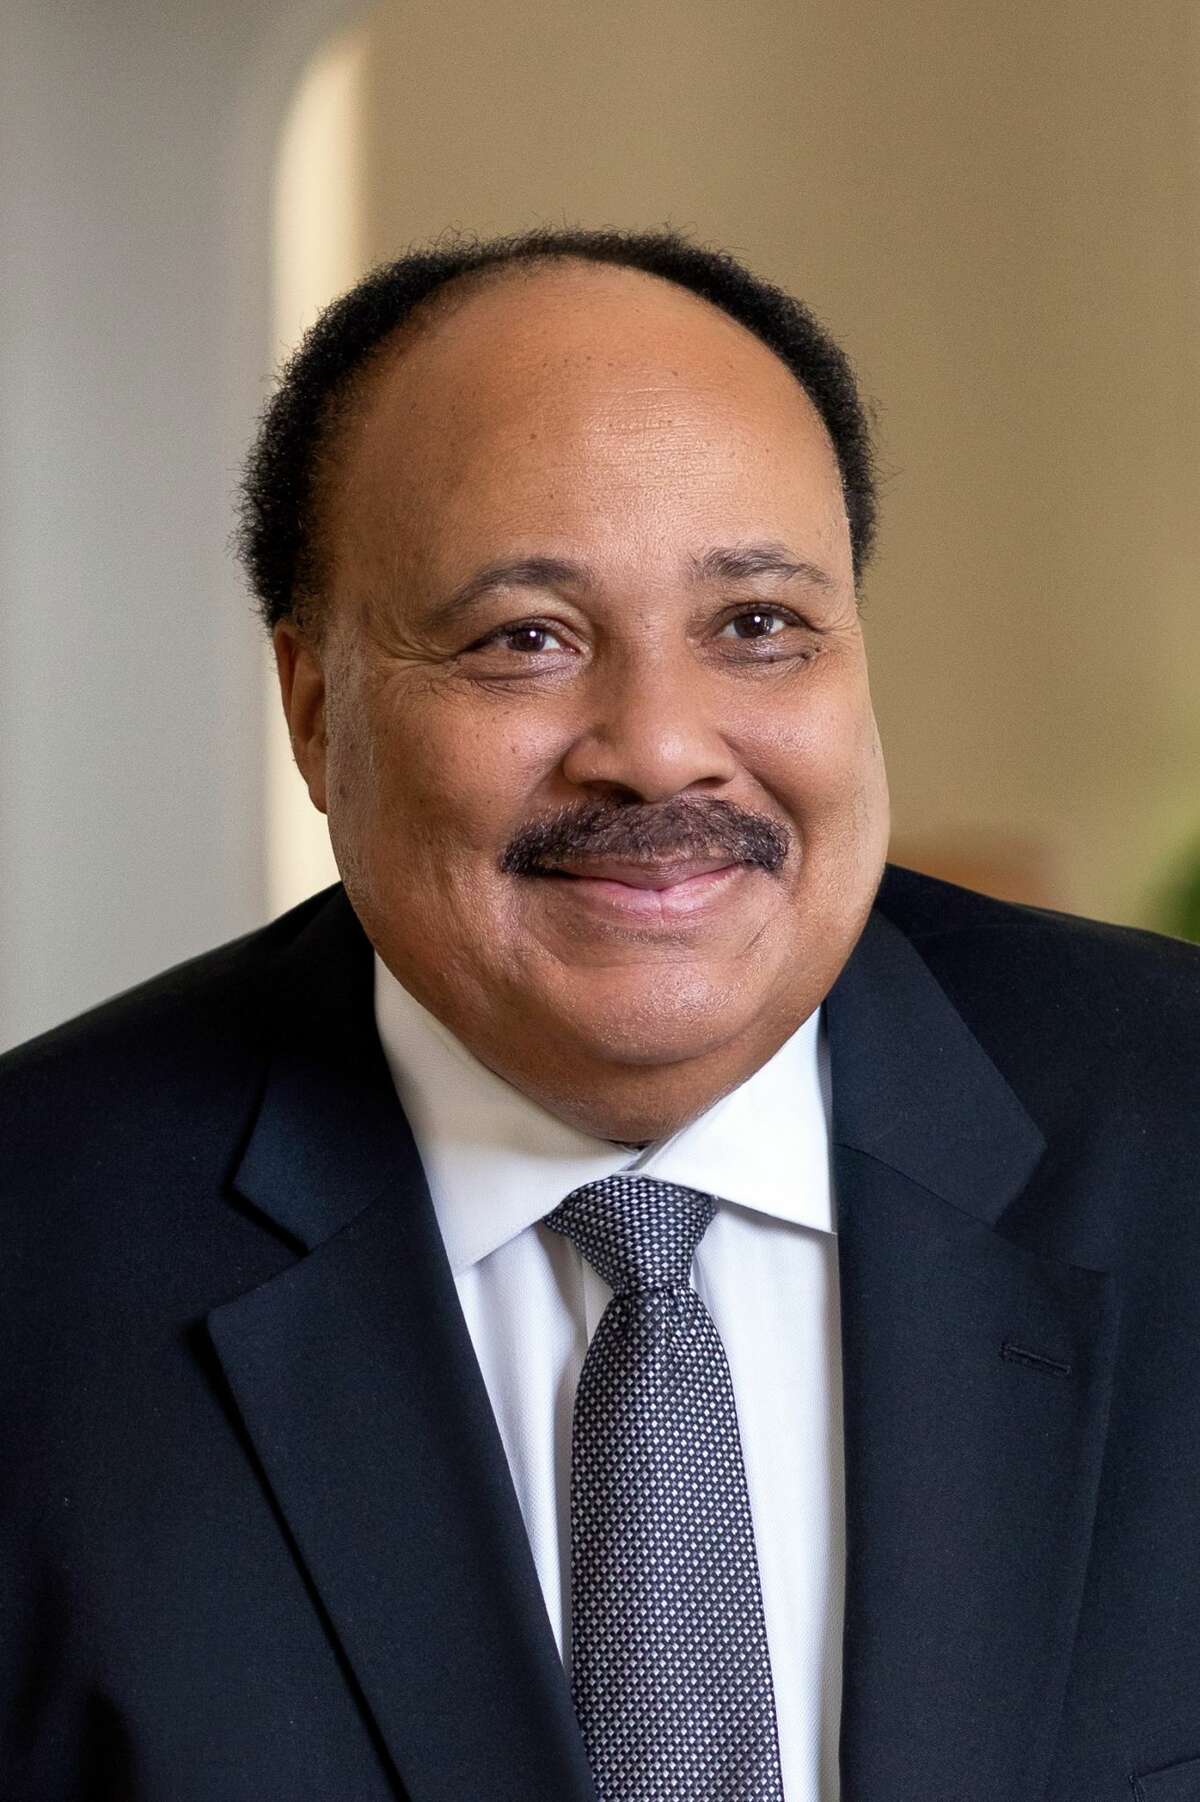 Martin Luther King III will visit Siena College in May 2022